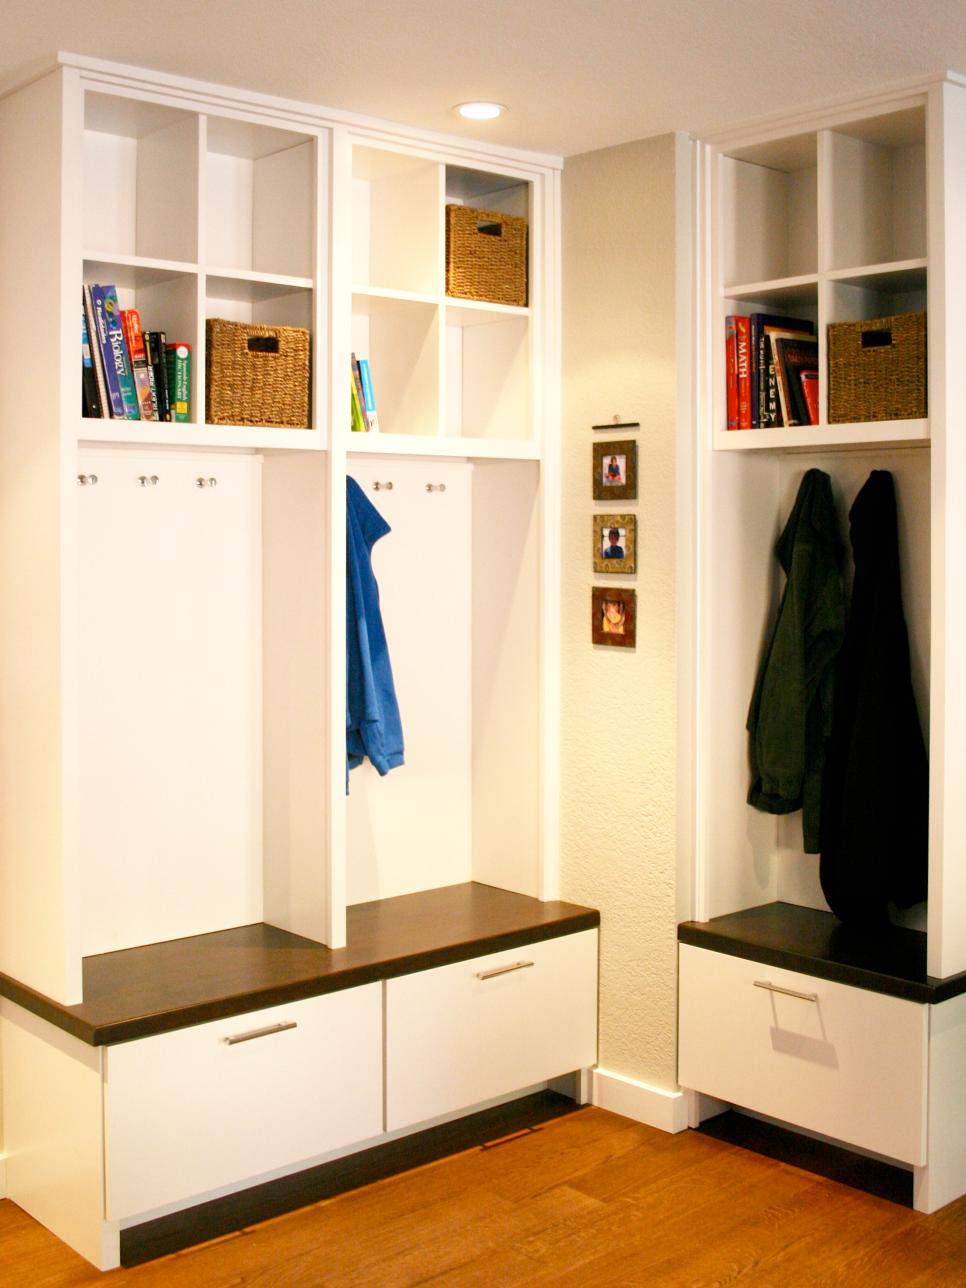 Mudroom Storage With White Cabinetry